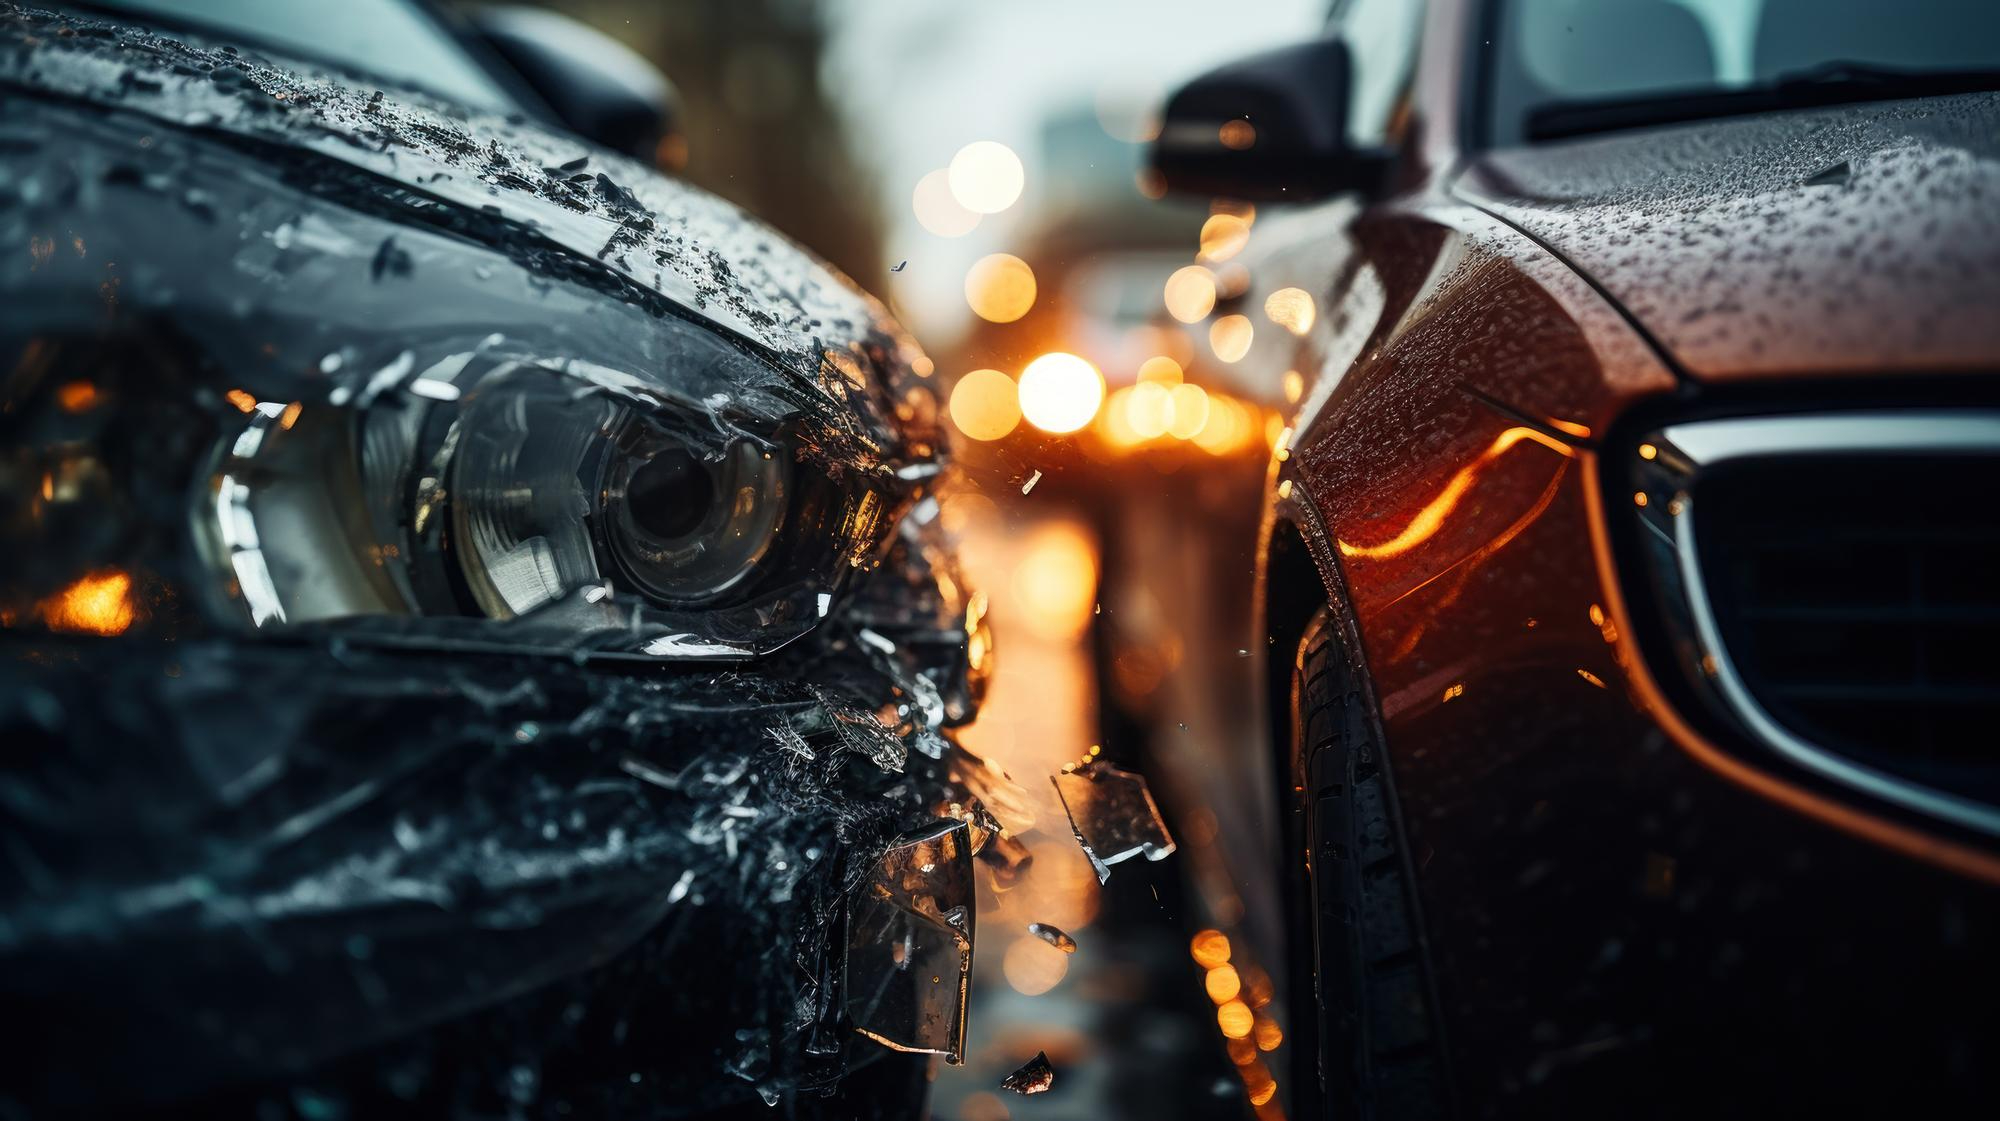 A close up picture of two cars crashing into each other. Flying glass and other shards are seen.